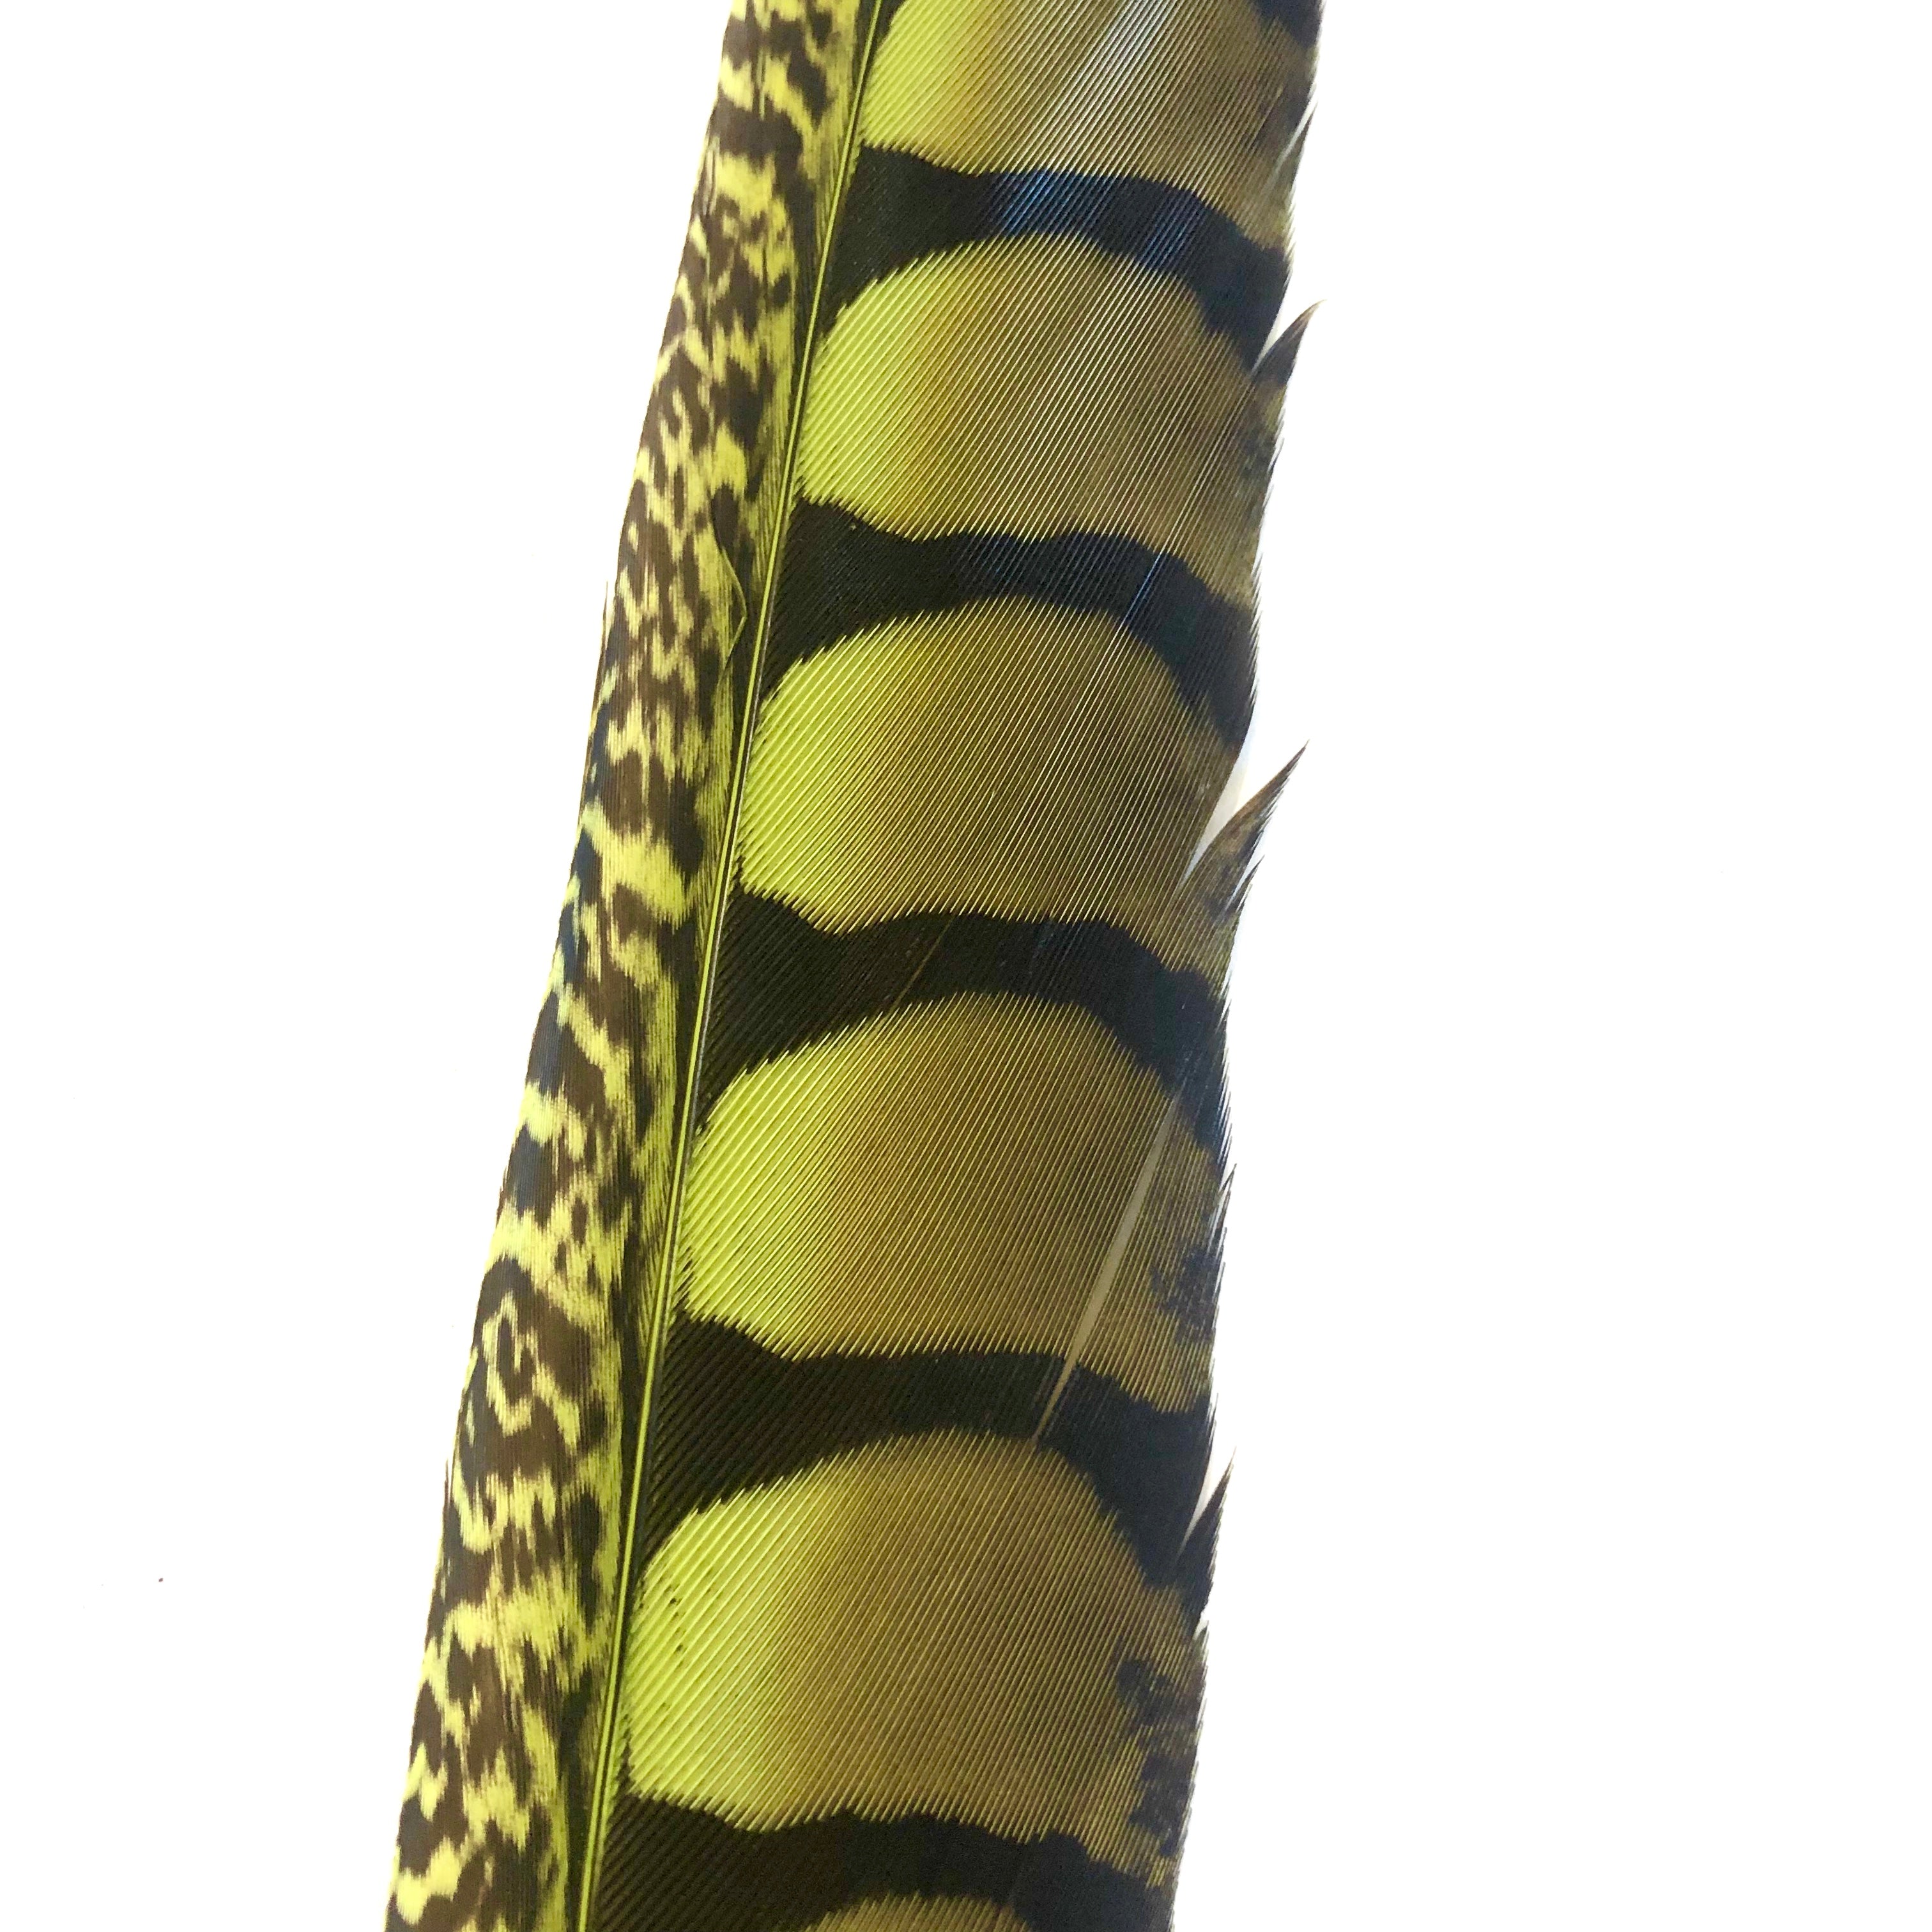 30" to 38" Lady Amherst Pheasant Side Tail Feather - Lime Green ((SECONDS))